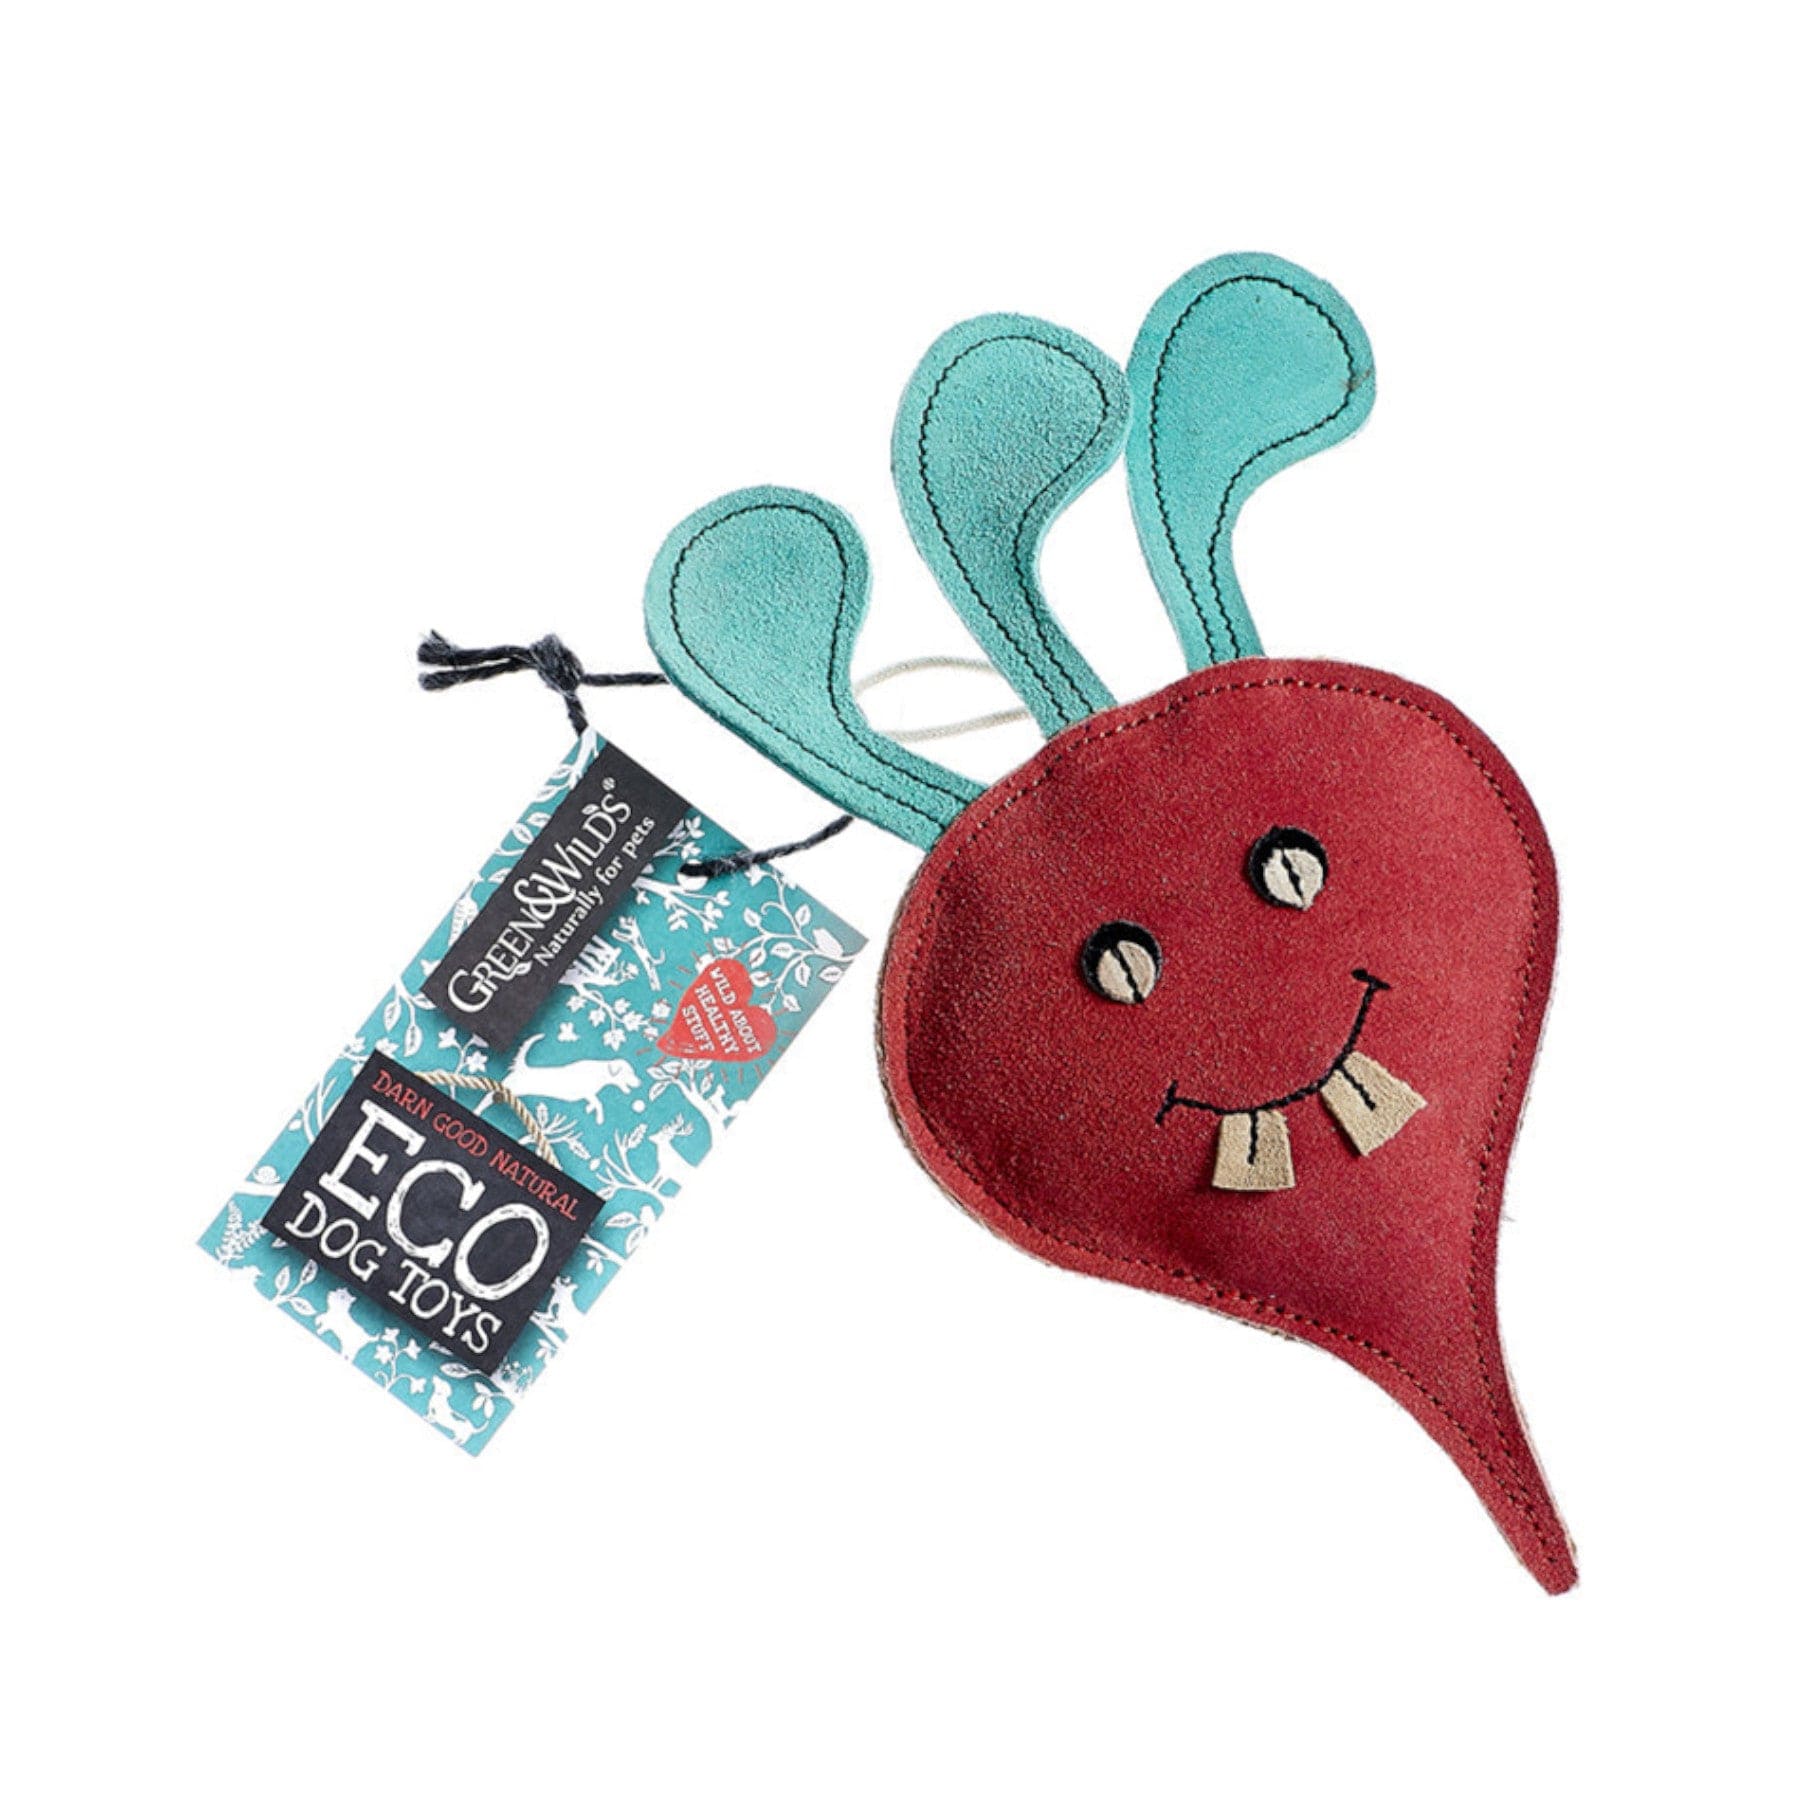 Eco-friendly red and teal dog toy with smiling face, durable fabric, sustainable pet supplies, GreenWinds branding tag attached.